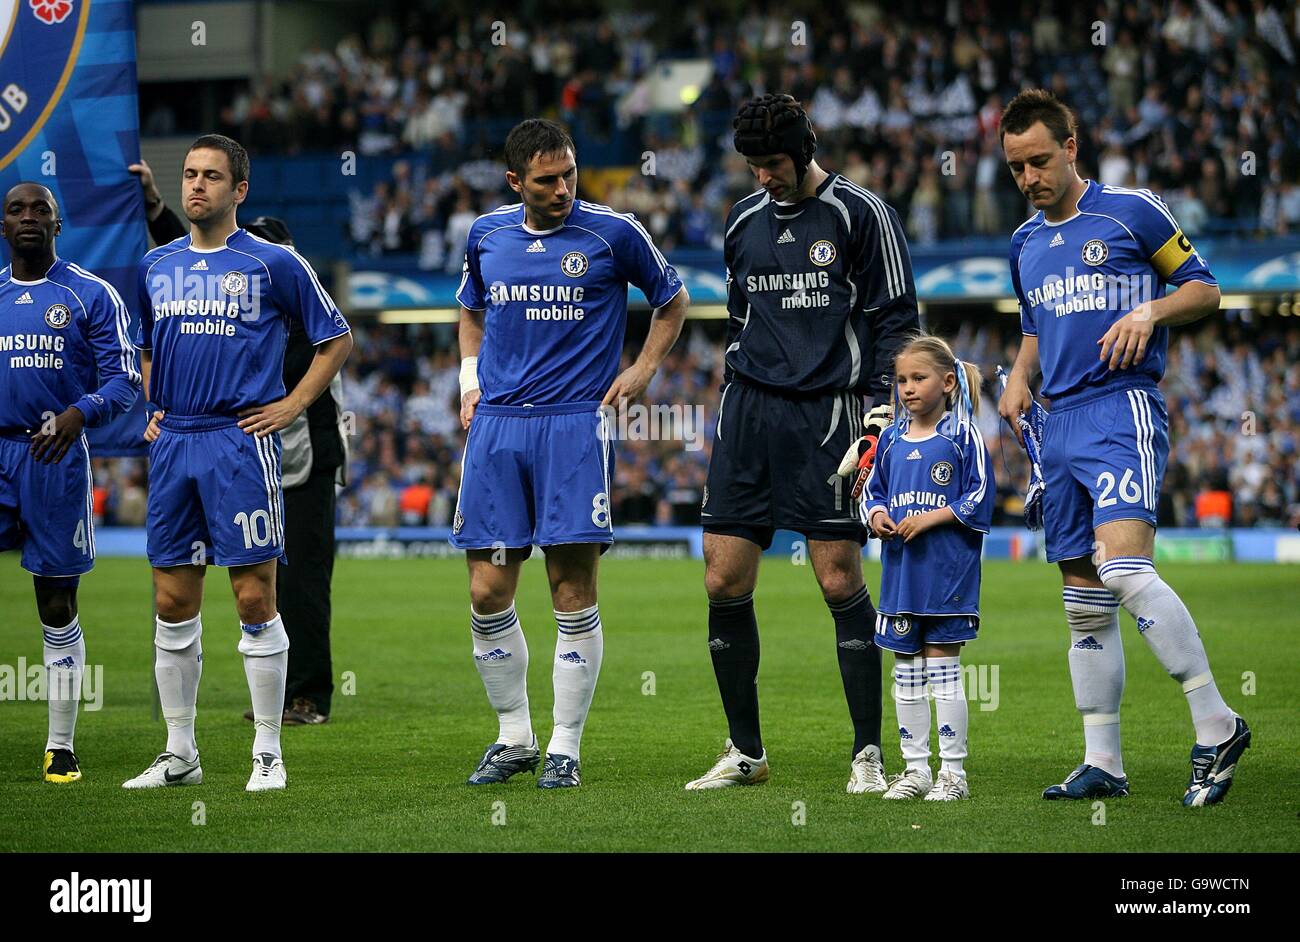 Soccer - UEFA Champions League - Semi-Final - First Leg - Chelsea v Liverpool - Stamford Bridge. Chelsea's Claude Makelele, Joe Cole, Frank Lampard, Petr Cech amd John Terry line up with the matchday mascot Stock Photo